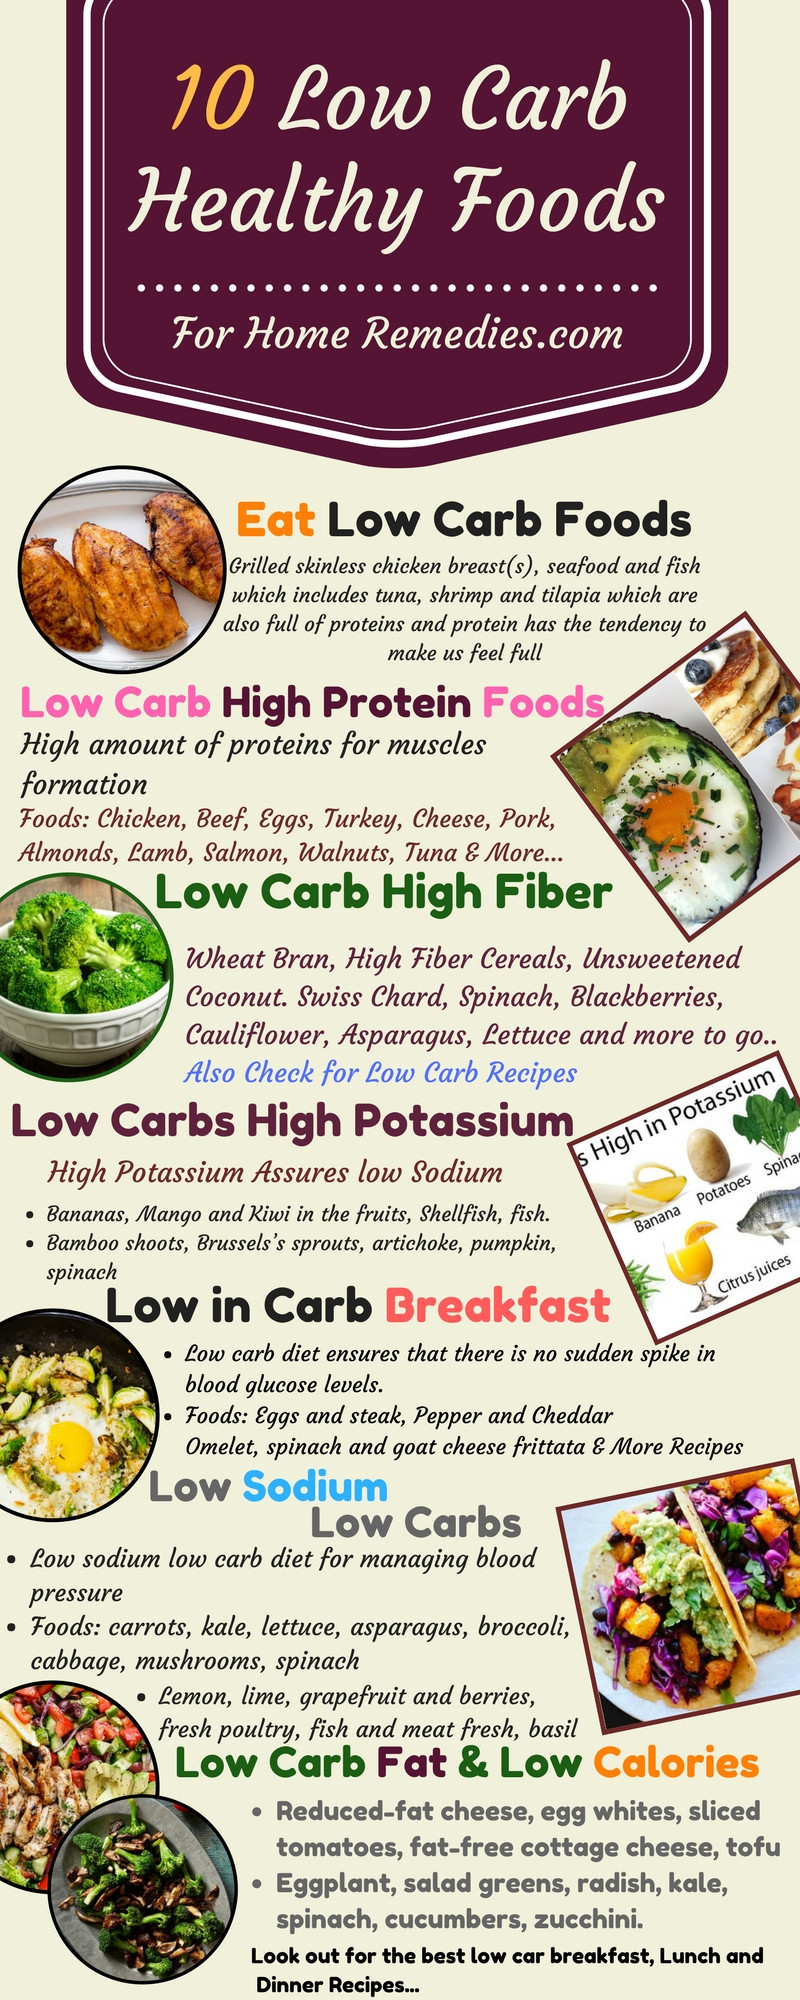 Low Sodium Low Cholesterol Recipes
 10 Low Carb Foods Low Fat Sugar High Protein Fiber